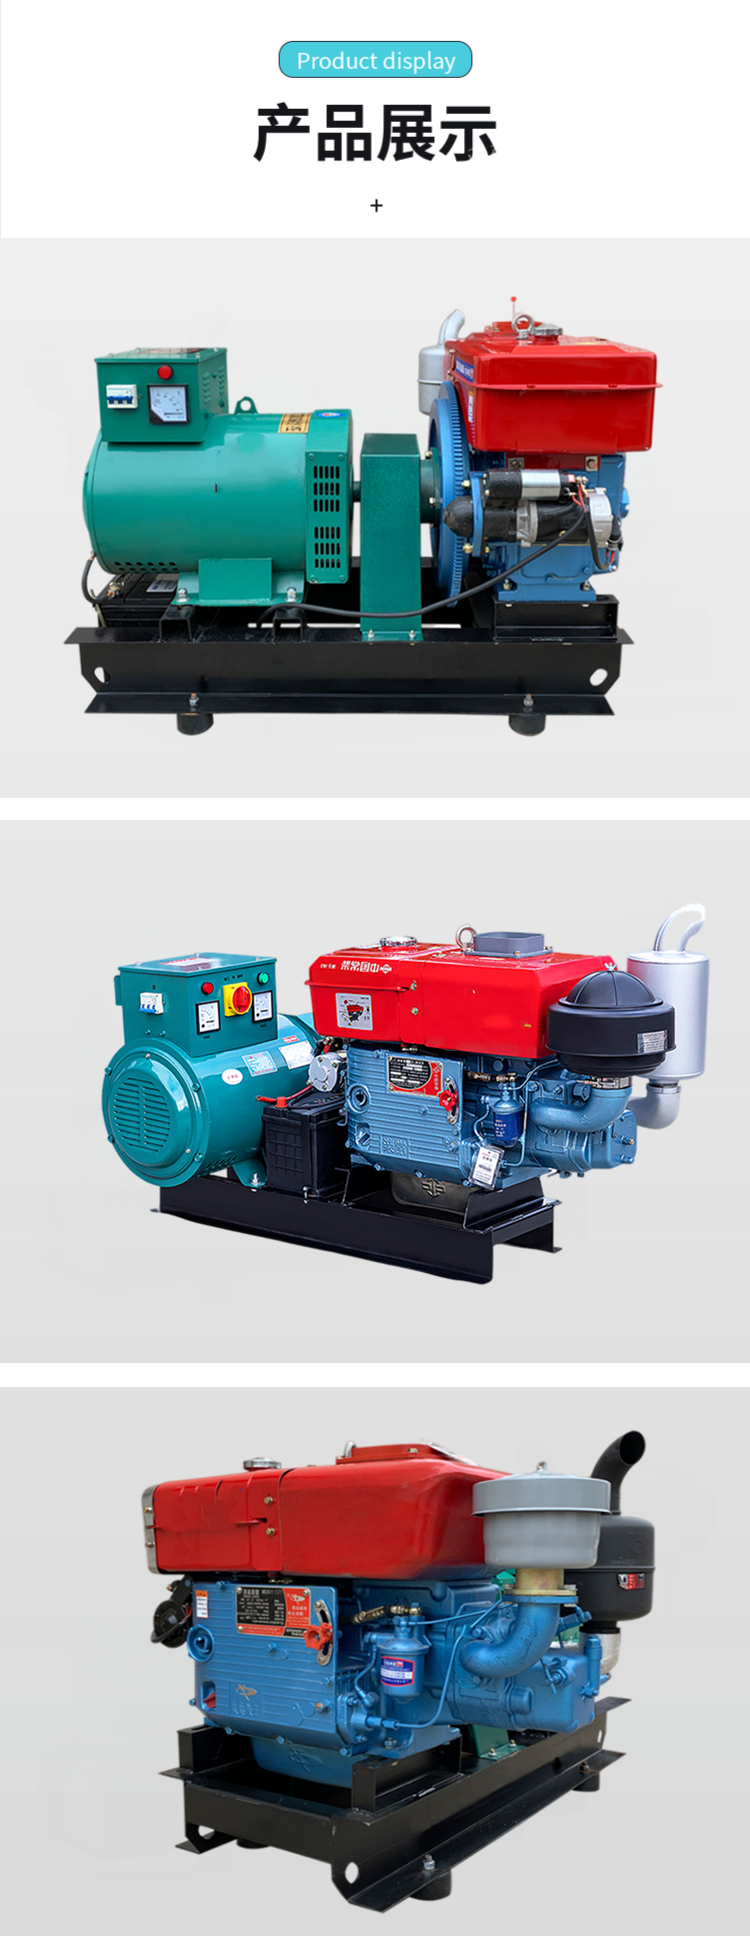 Electric starting 24kw diesel engine generator set, pure copper motor, single cylinder water-cooled diesel power generation system